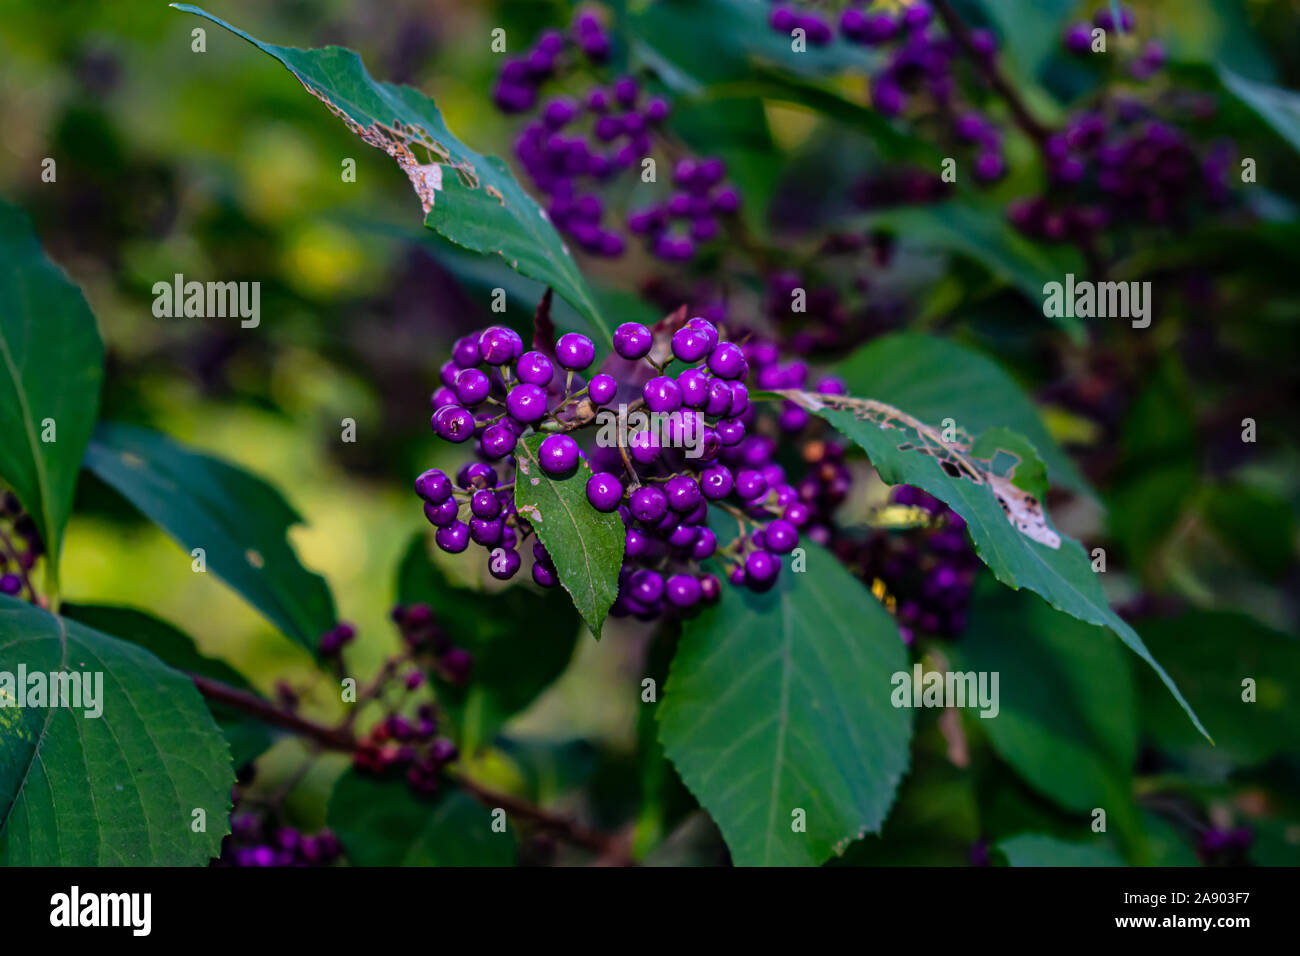 Beautiful purple coloured Beauty berries known as Callicarpa from the Lamiaceae family. Native to Southeast Asia. Taken in the Secret Garden in Seoul. Stock Photo